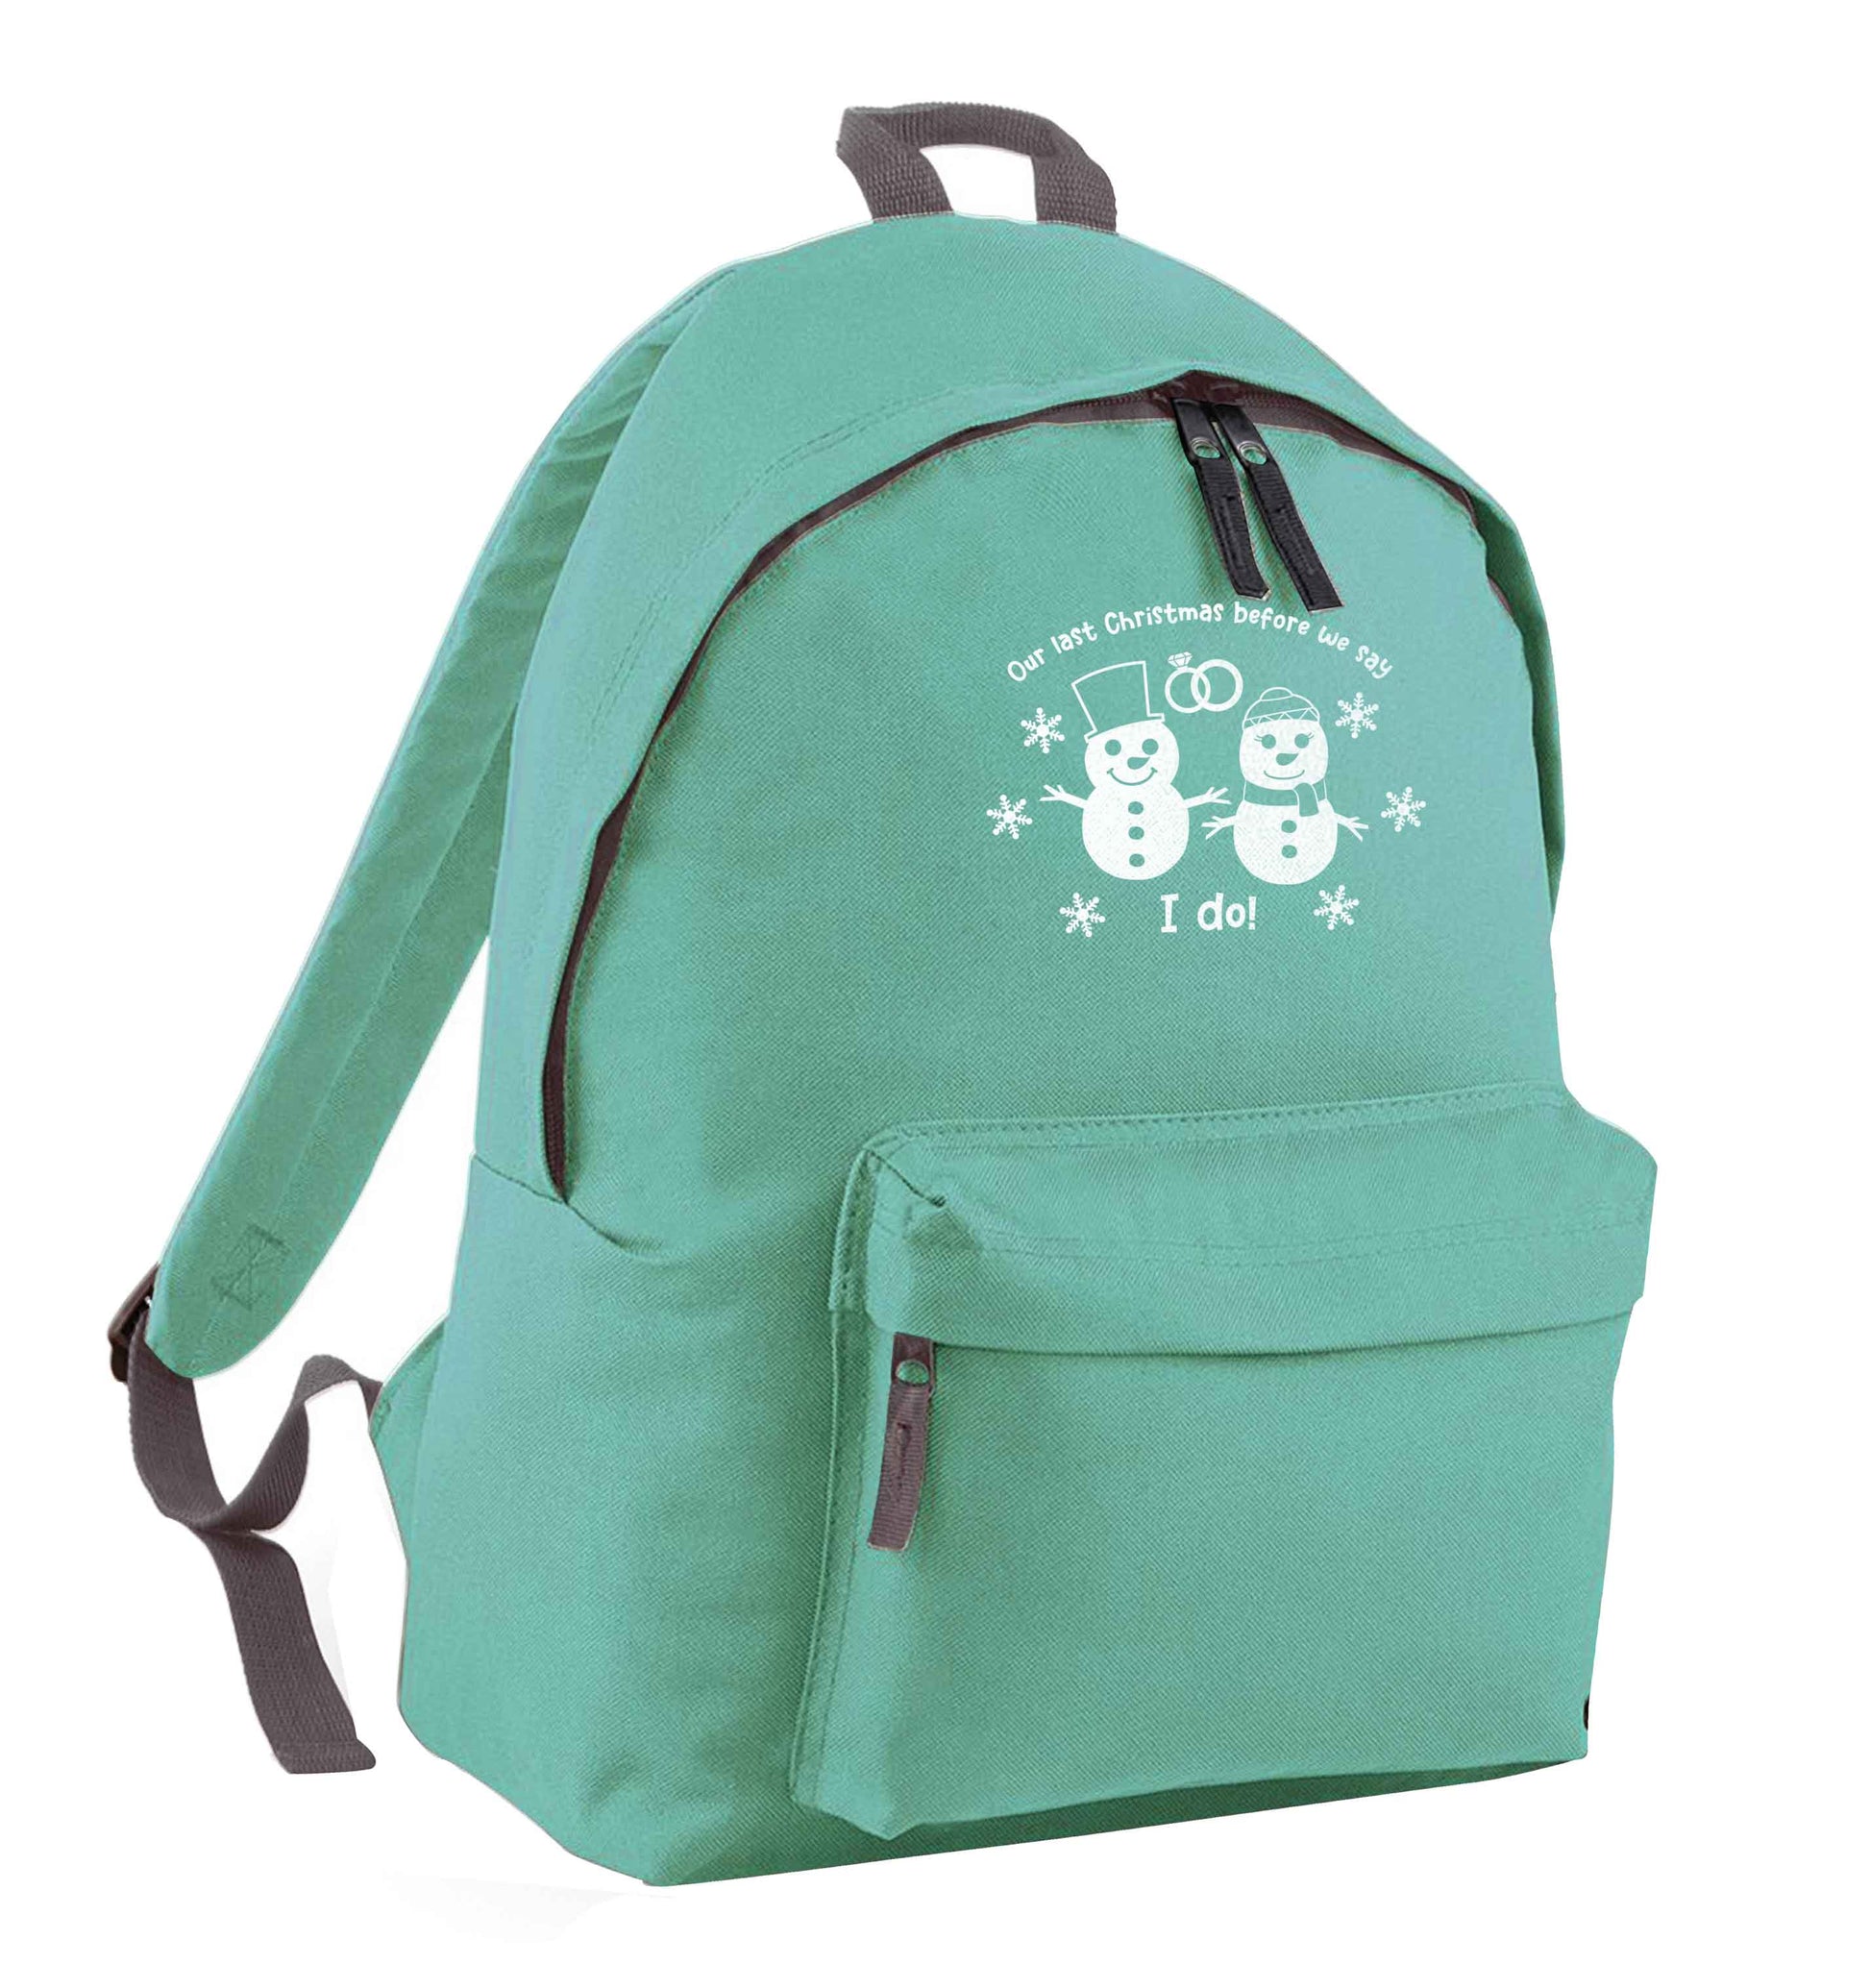 Last Christmas before we say I do mint adults backpack